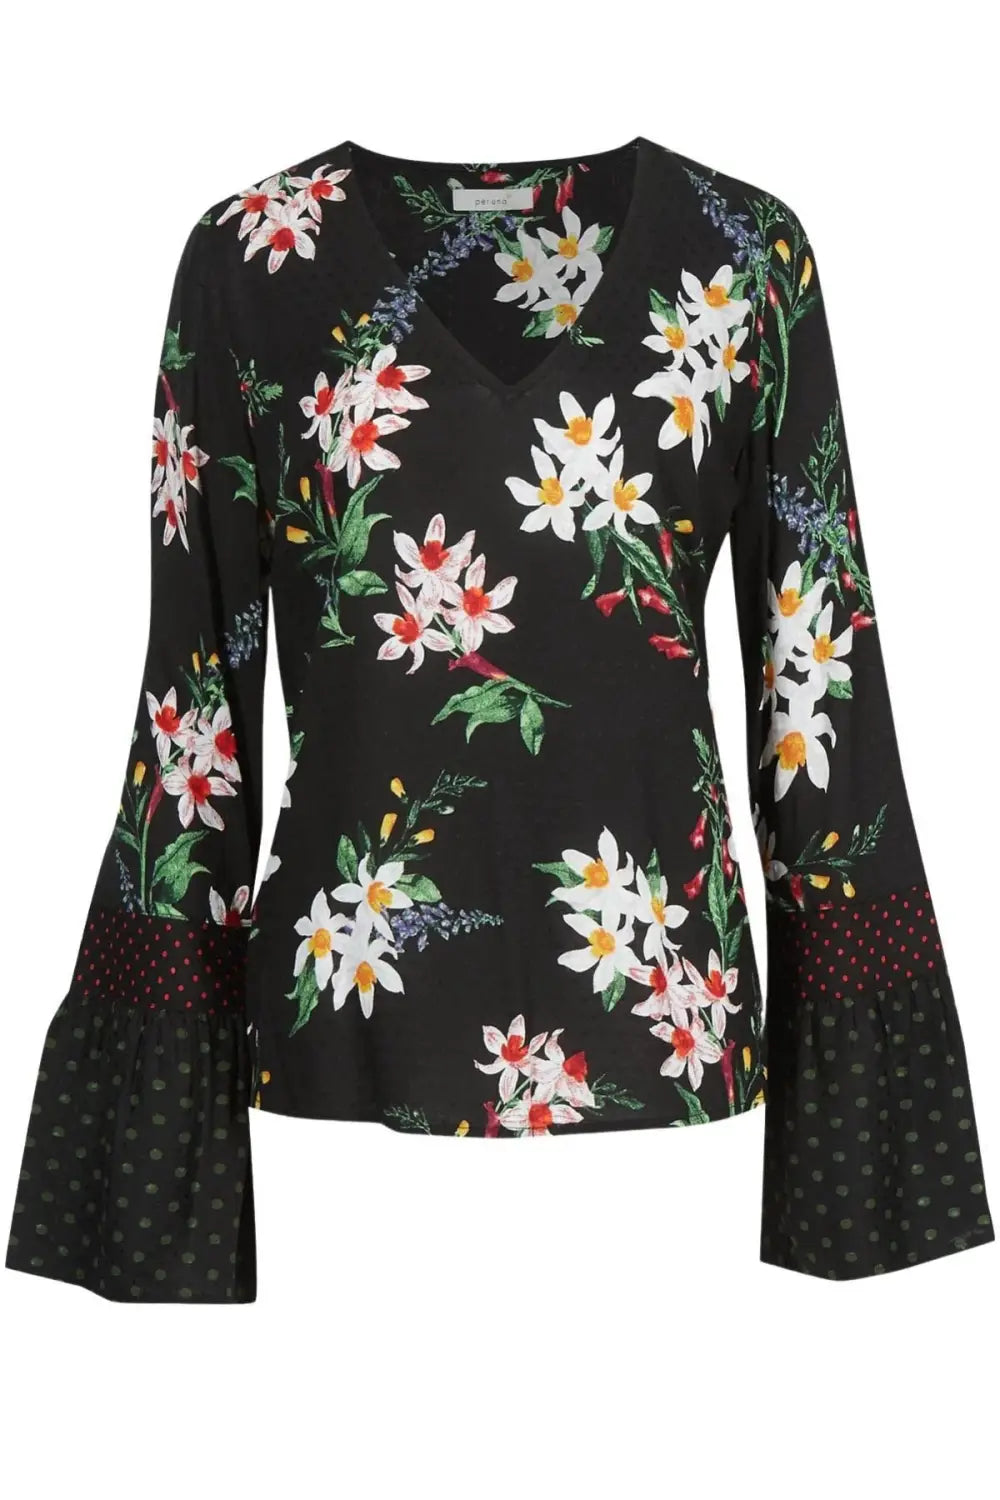 M&S Per Una Floral Bell Sleeve Blouse